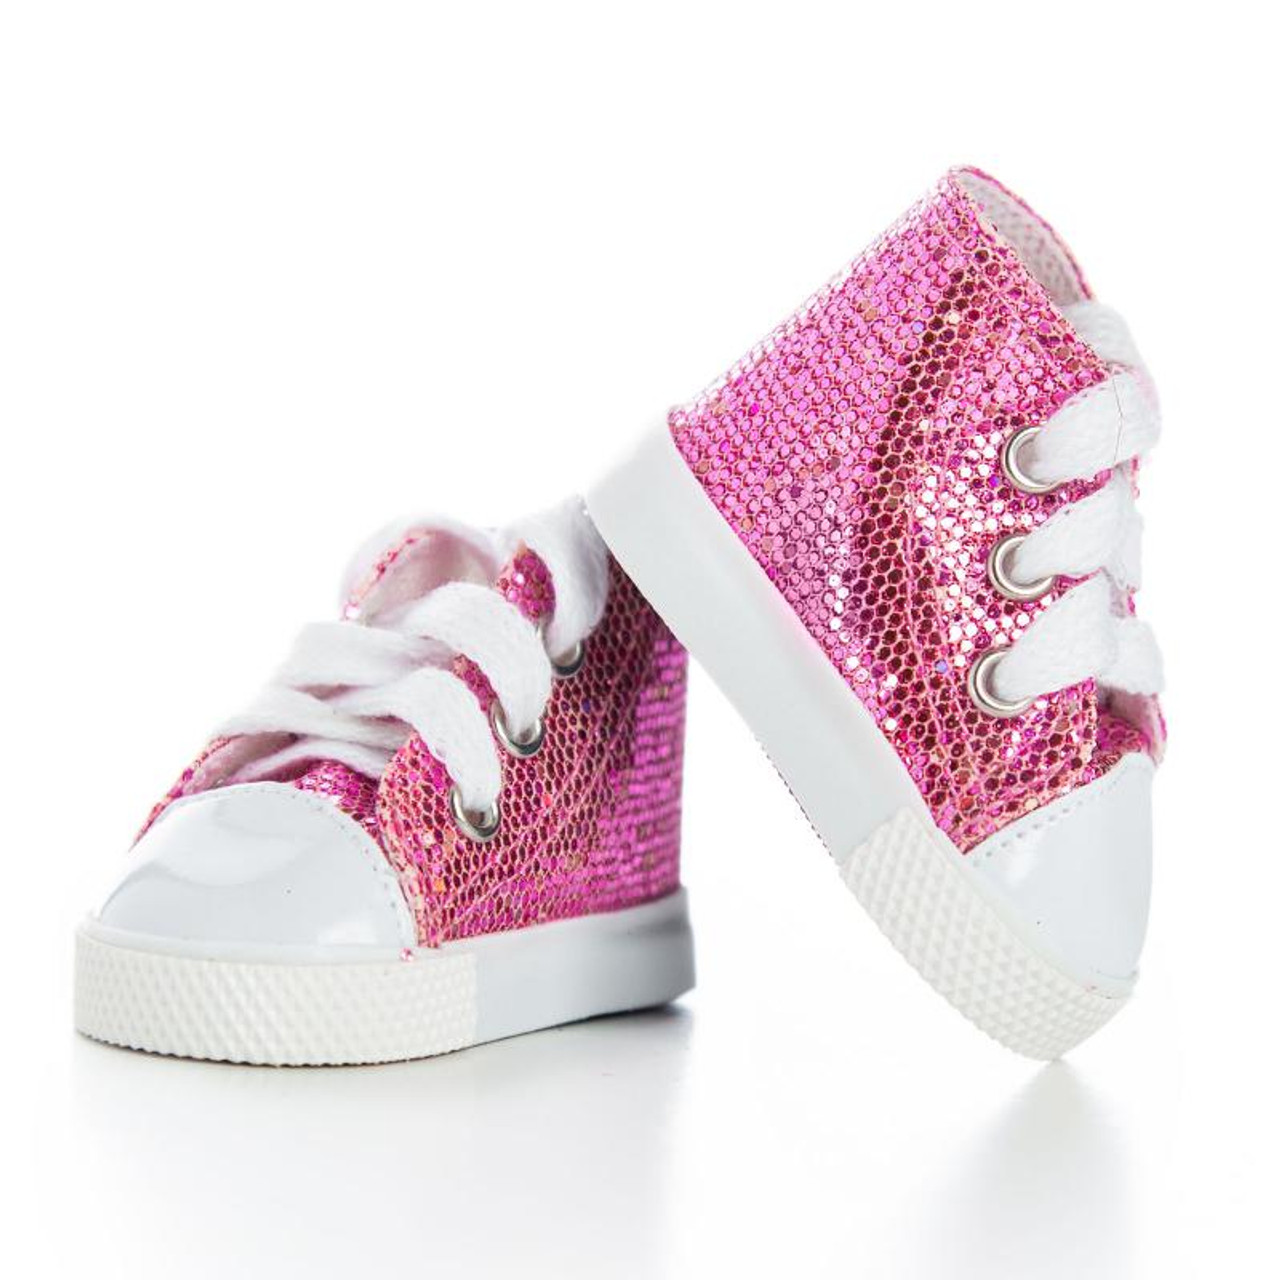 Set of 2 Pair of Glitter Sneaker Shoes for 18 Dolls